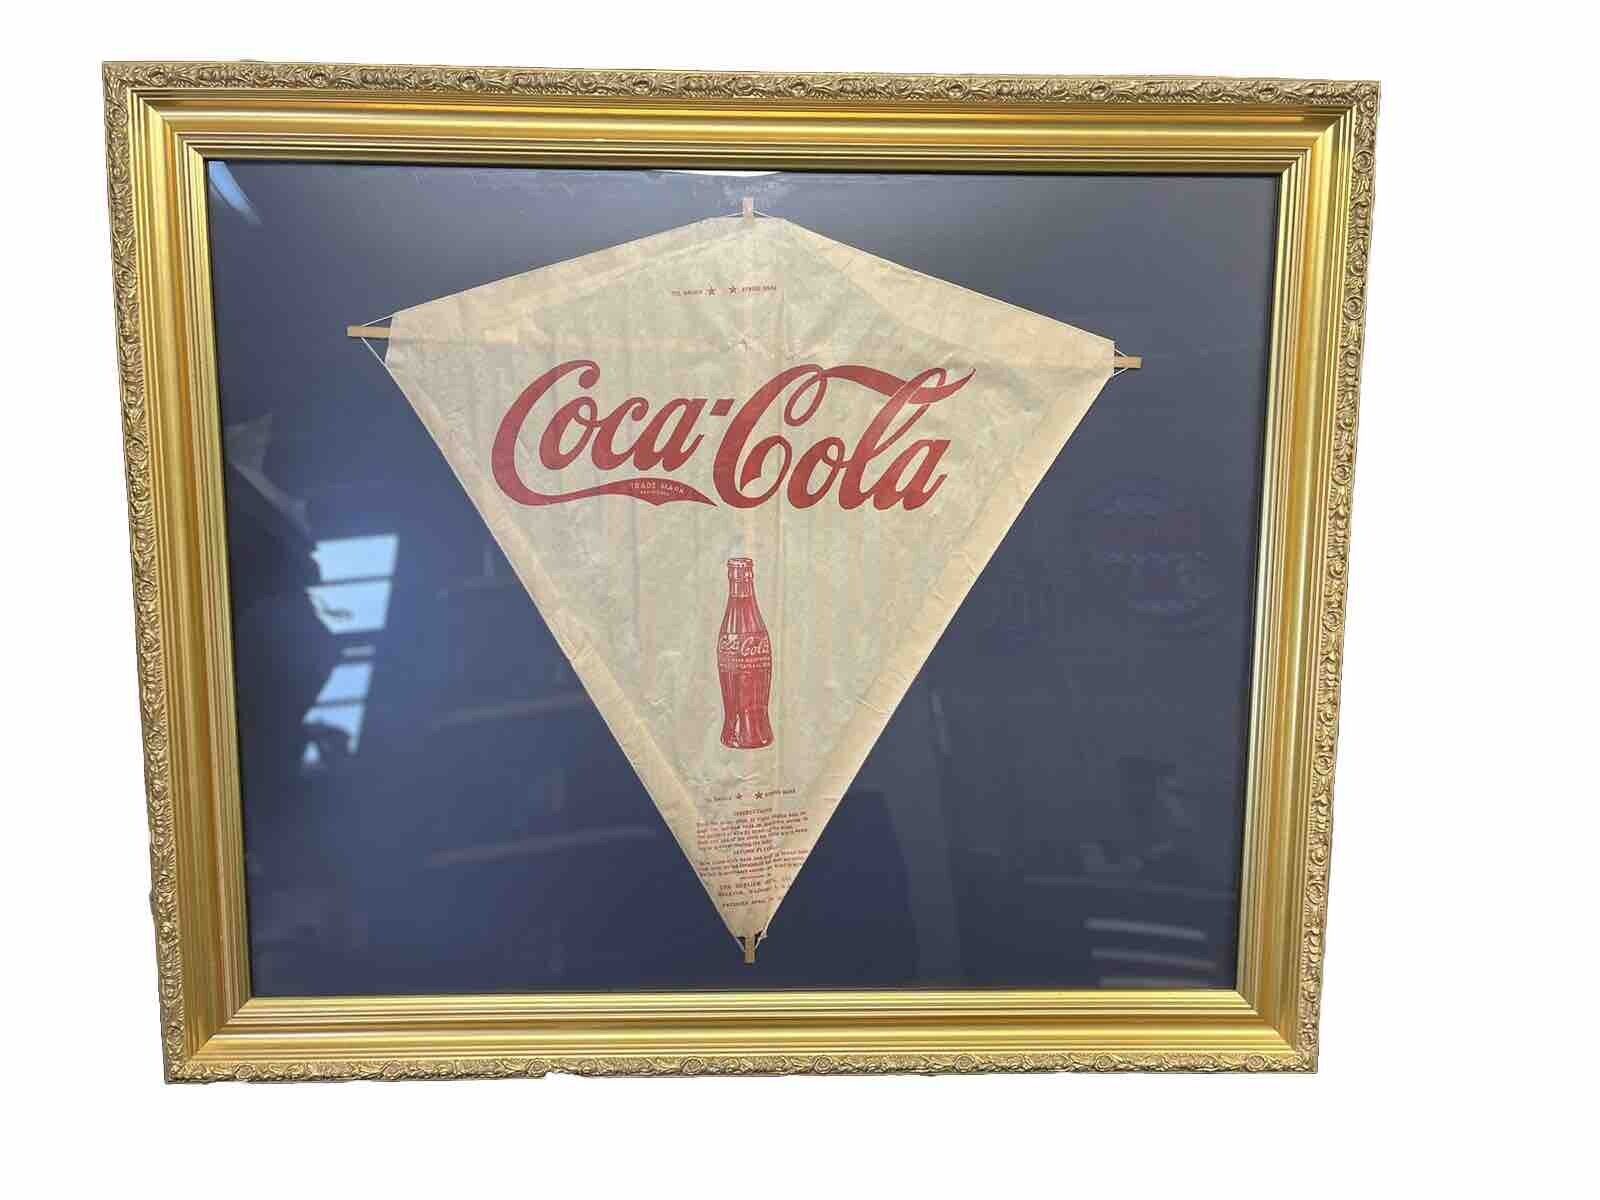 Museum Quality Vintage 1920’s Coca-cola Advertising Kite Professional Framed.